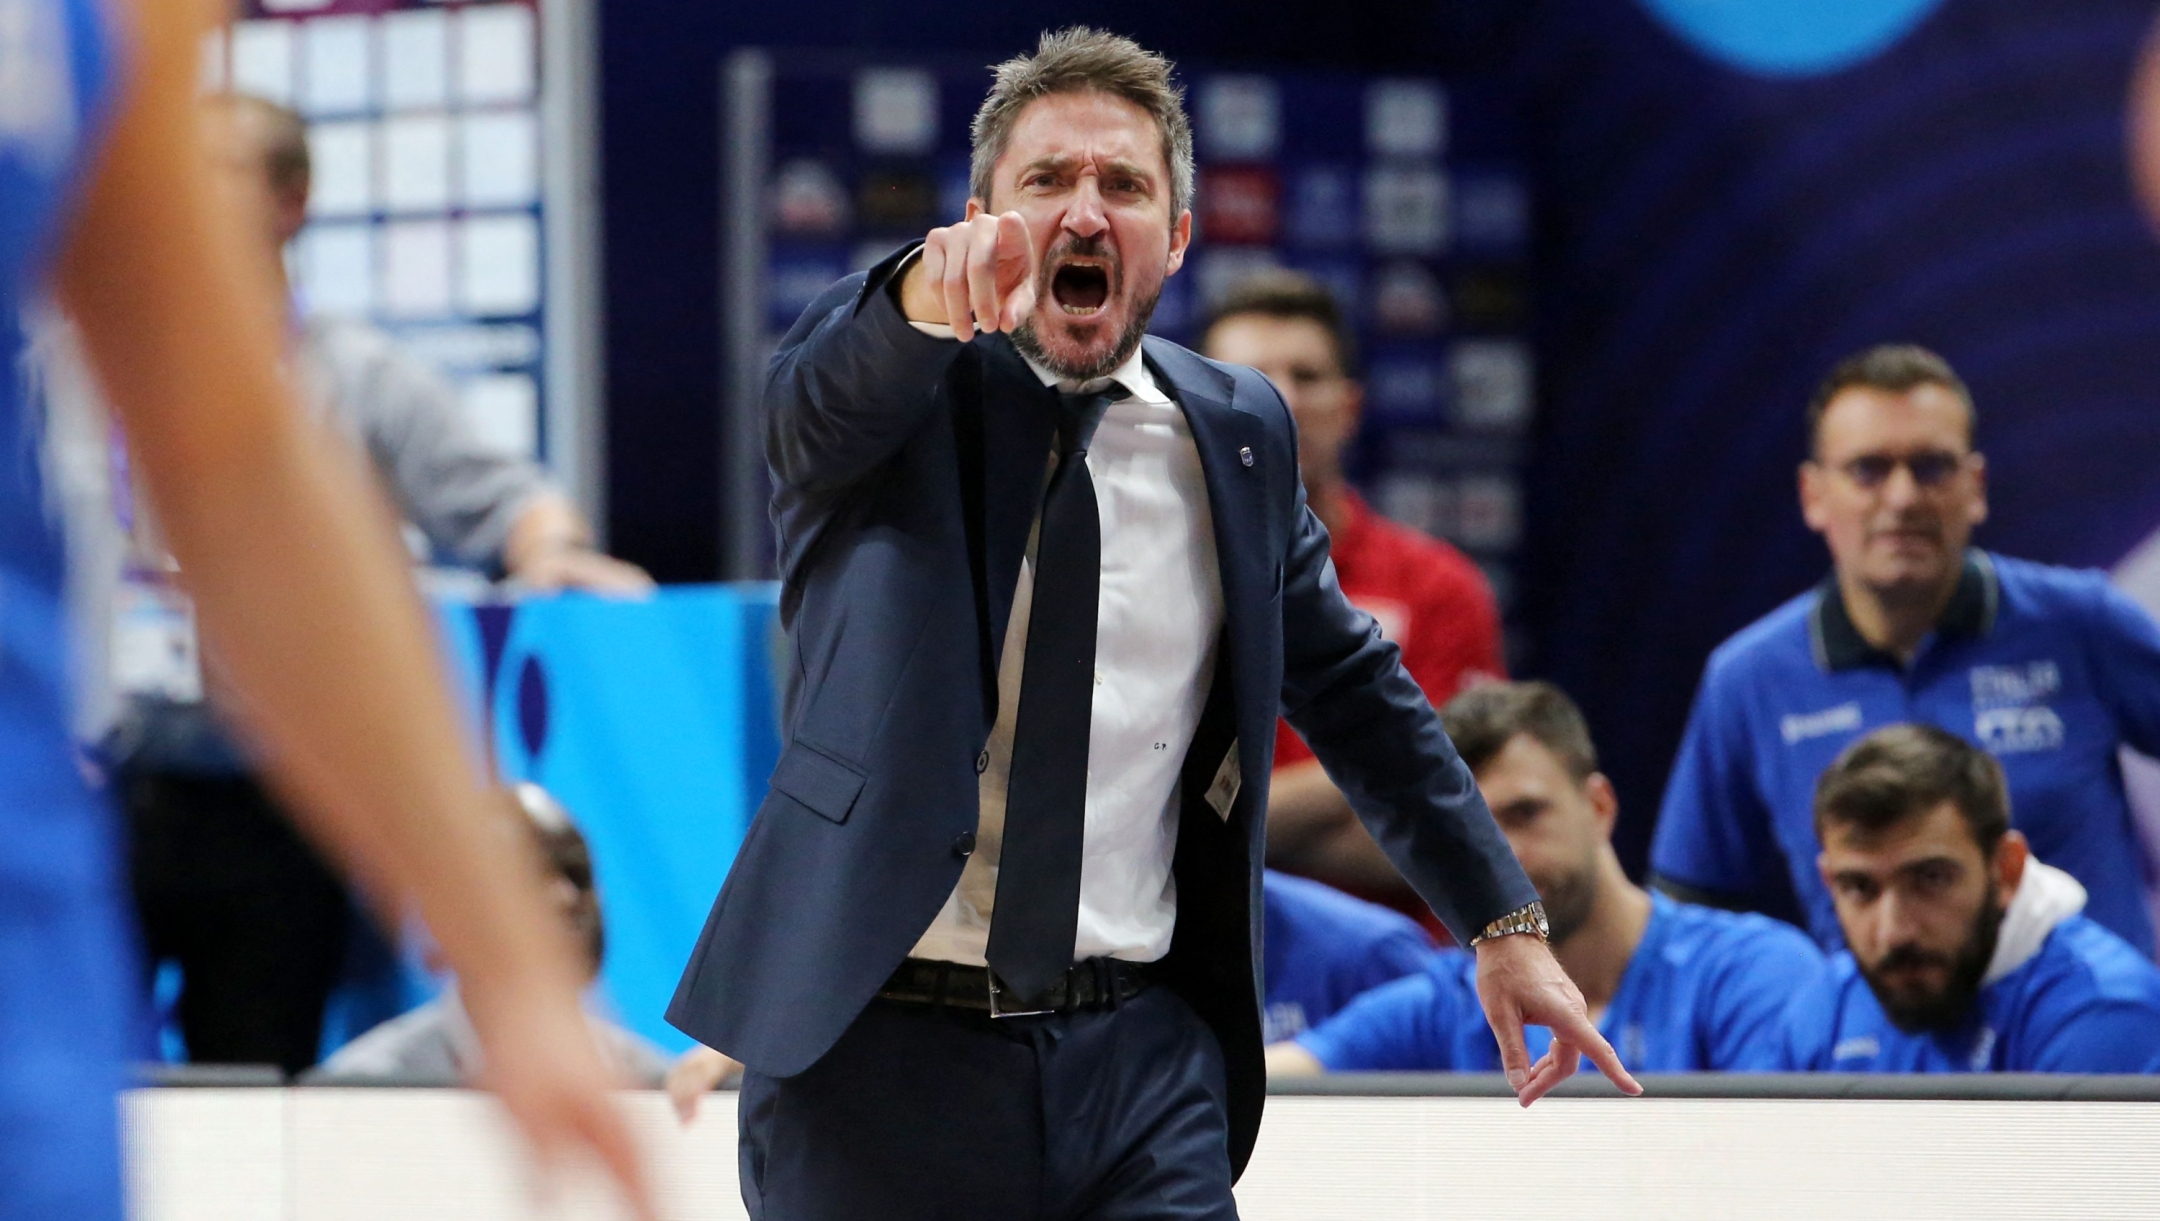 (FILES) Italy's head coach Gianmarco Pozzecco reacts during the FIBA Eurobasket 2022 quarter-final basketball match between France and Italy in Berlin, Germany, on September 14, 2022. Italian coach Gianmarco Pozzecco was appointed LDLC Asvel's coach on October 25, 2023, and will coach his first Euroleague game on October 27, 2023 at the Astroballe arena in Lyon against Italy's Virtus Bologna. (Photo by Oliver Behrendt / AFP)